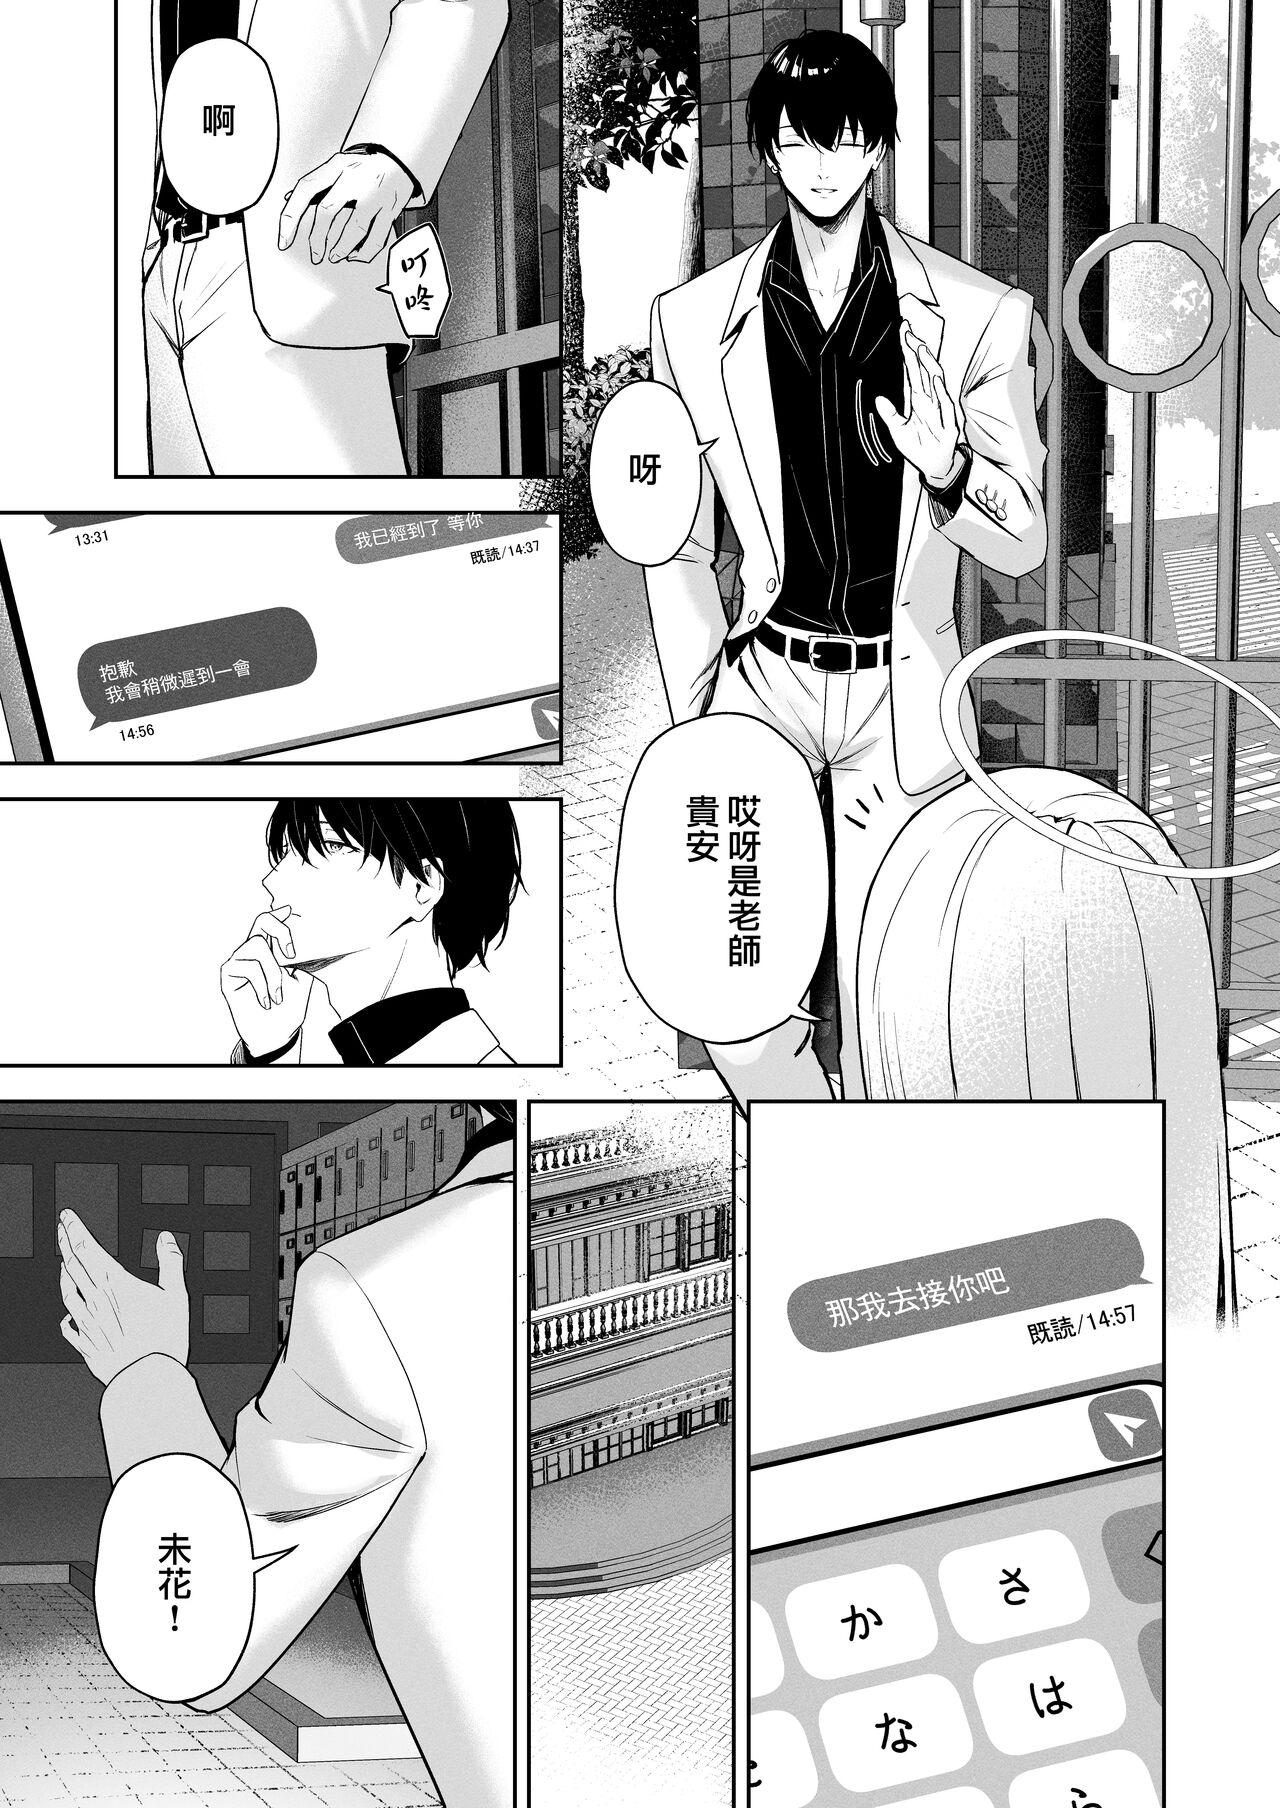 Glasses Mikazuki no Pierce Hole - Pierce Hole of The Cresent Moon - Blue archive Stroking - Page 7